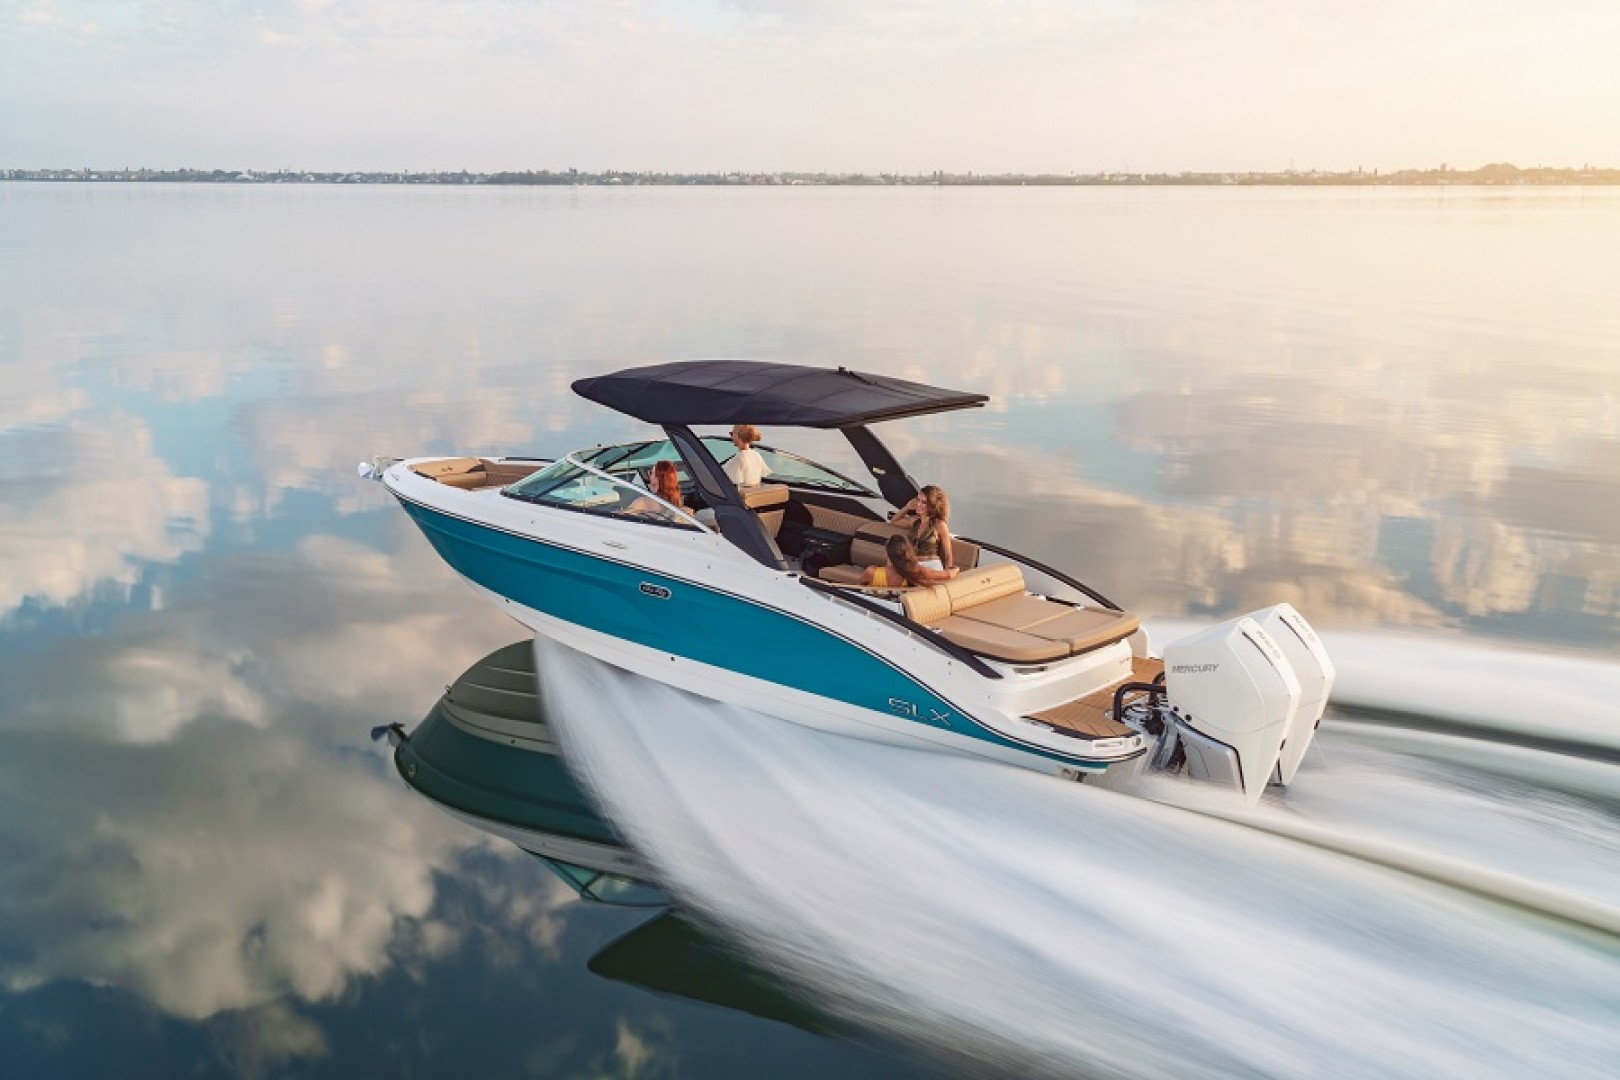 Sea Ray Launches the All-New SLX 280 Outboard